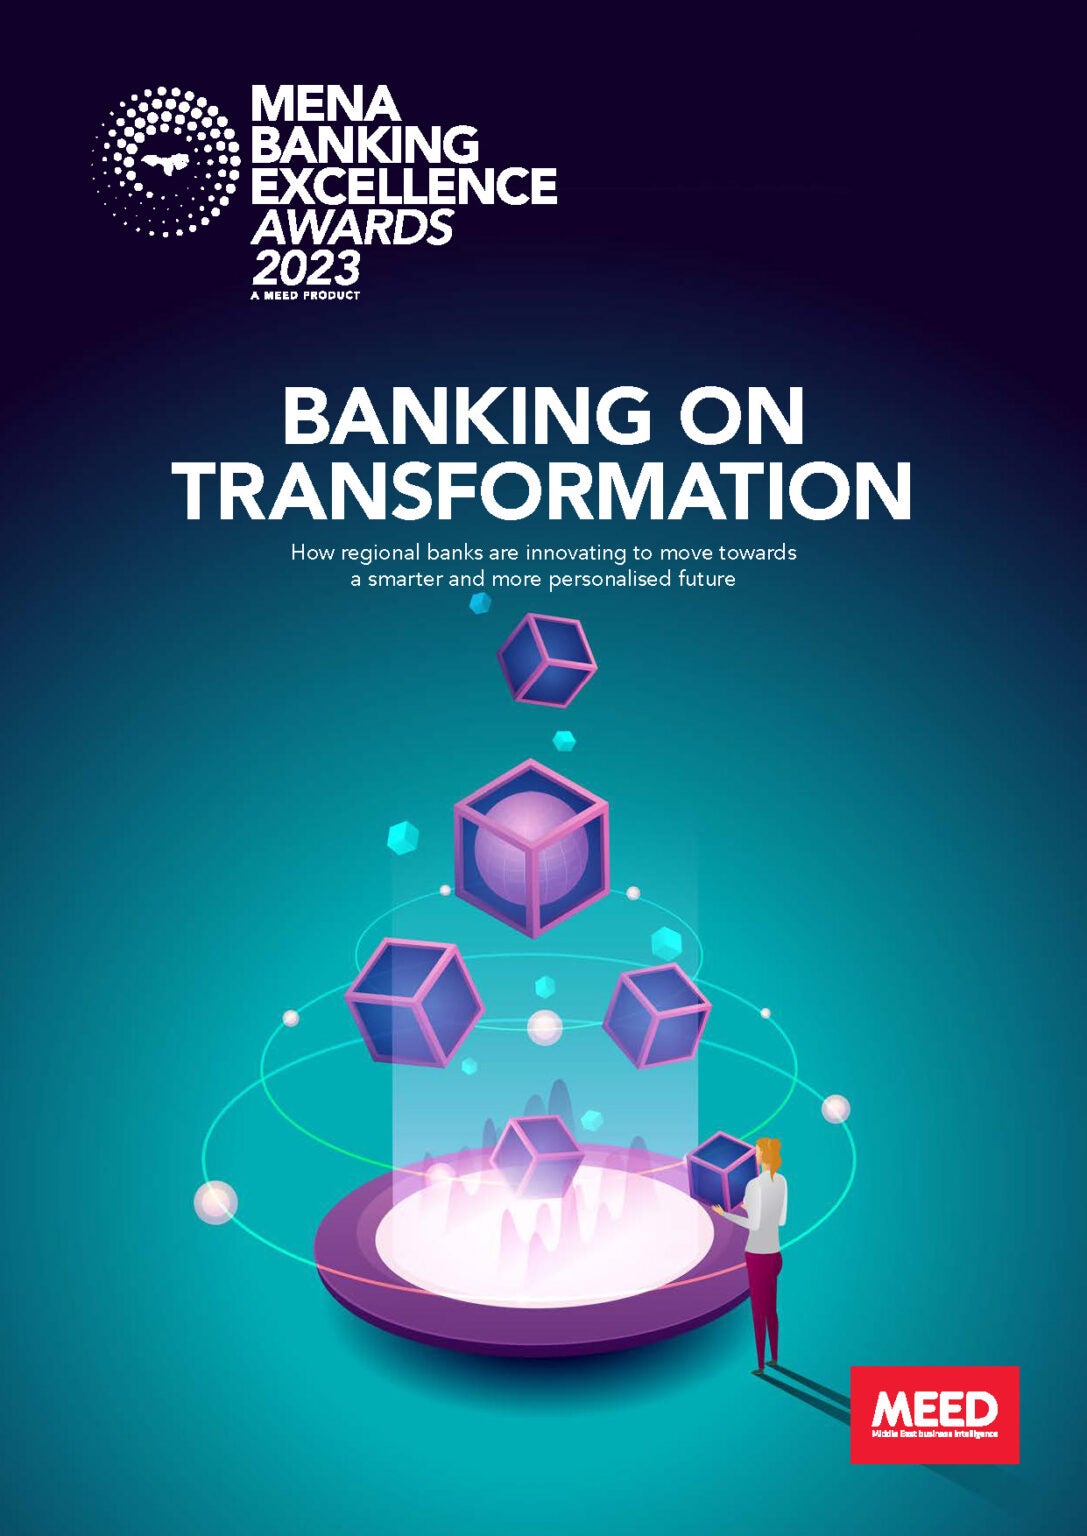 MENA Banking Excellence Awards 2024 Meed Events Hub